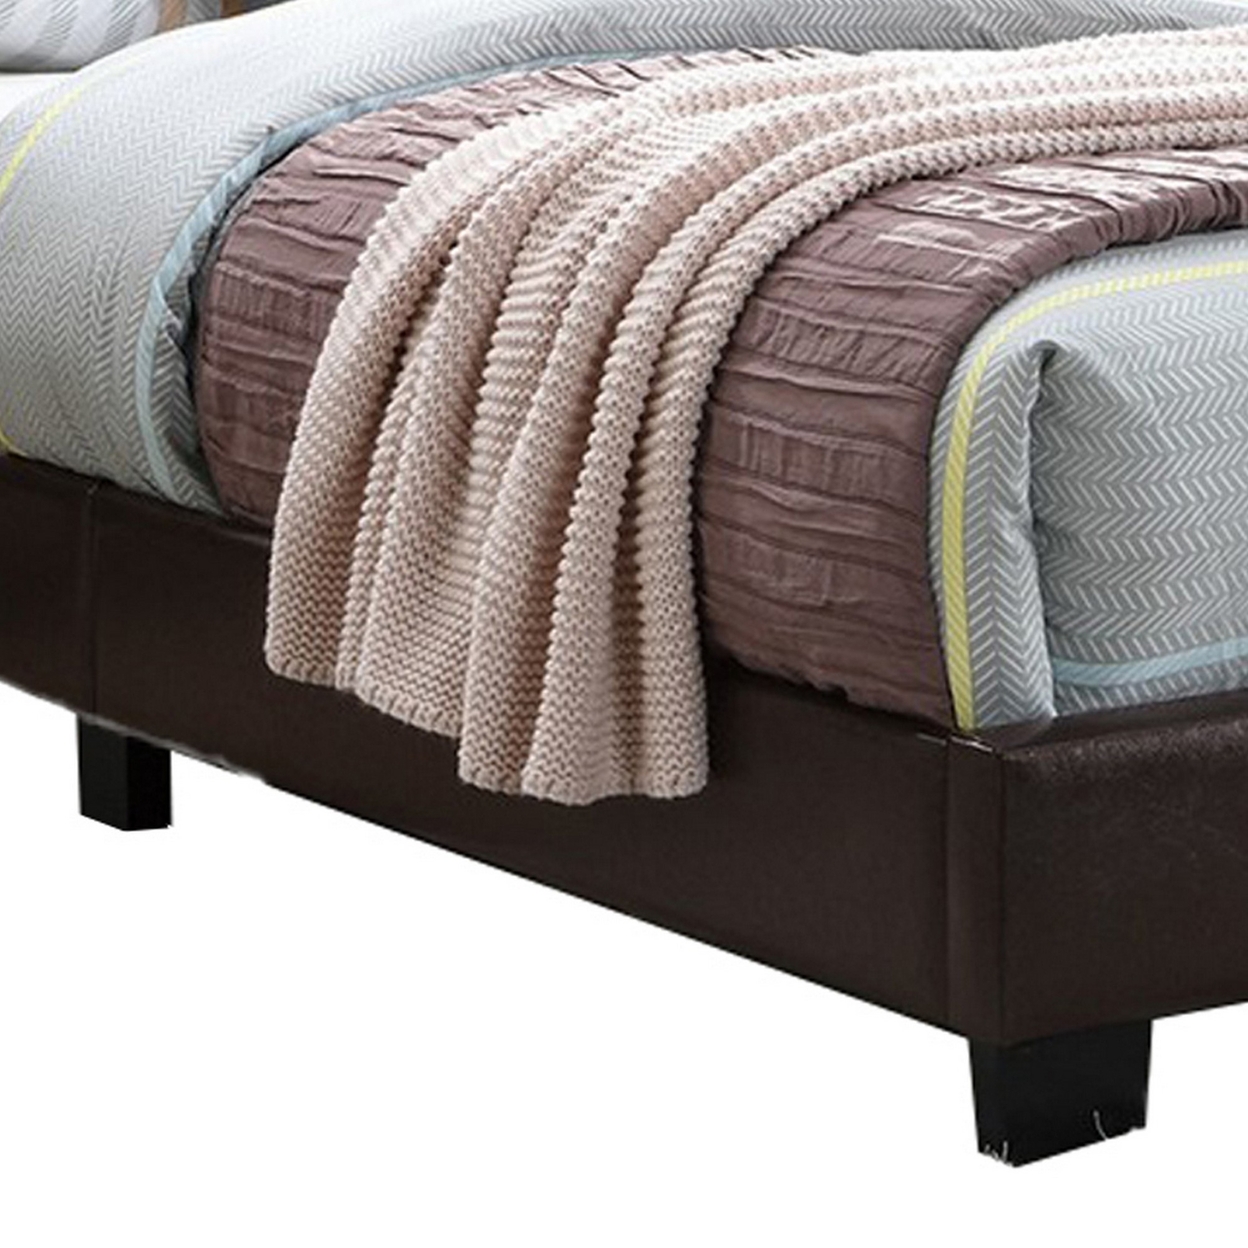 Transitional Style Leatherette Queen Bed With Padded Headboard, Dark Brown- Saltoro Sherpi